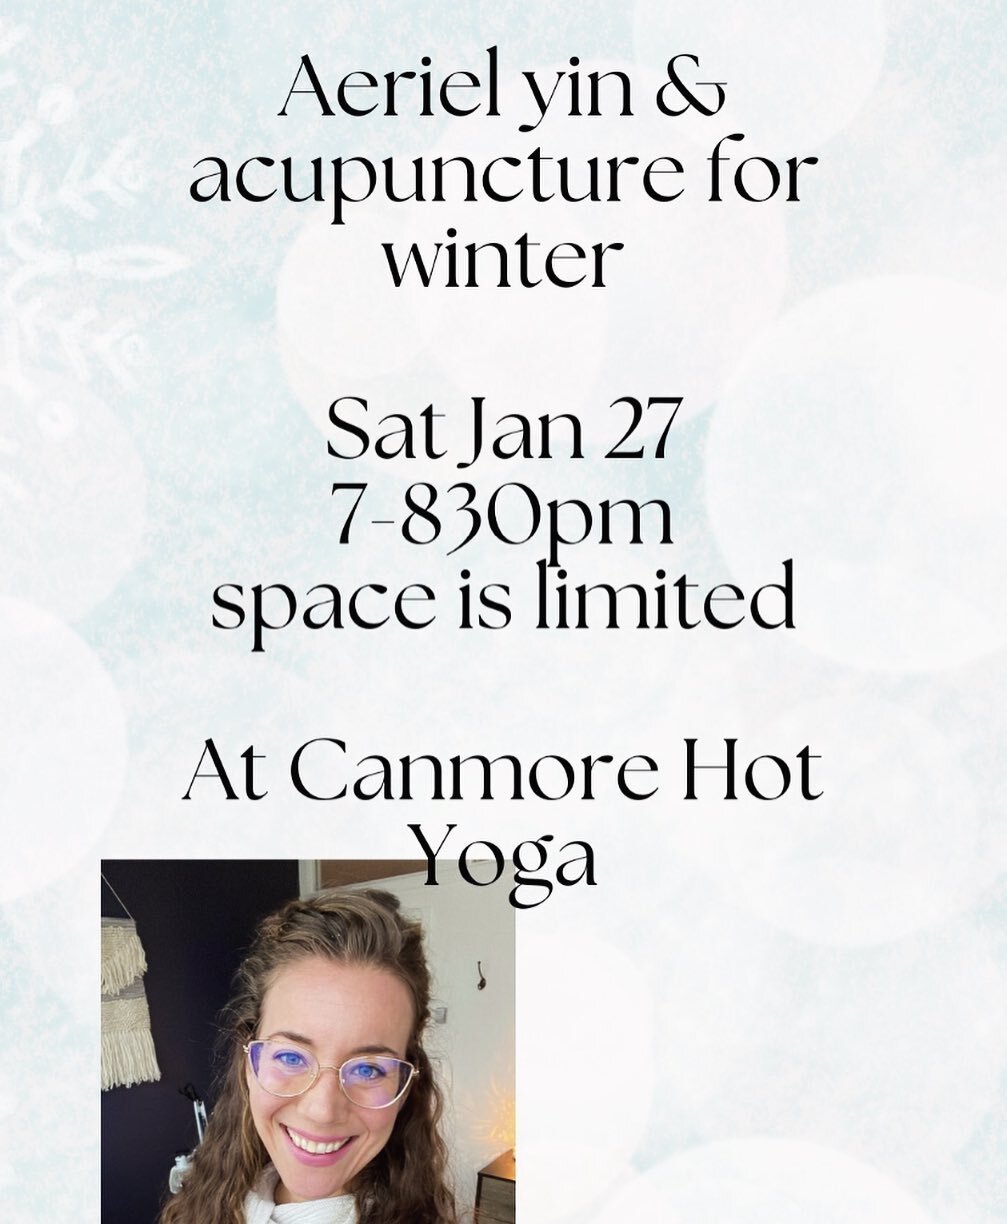 Join @meggywelchyheals, a yoga teacher and registered Acupuncturist here in the Bow Valley. She looks forward to blending her two favorite offerings in this very special Winter and Water season themed yoga practice, followed by a unique acupuncture s